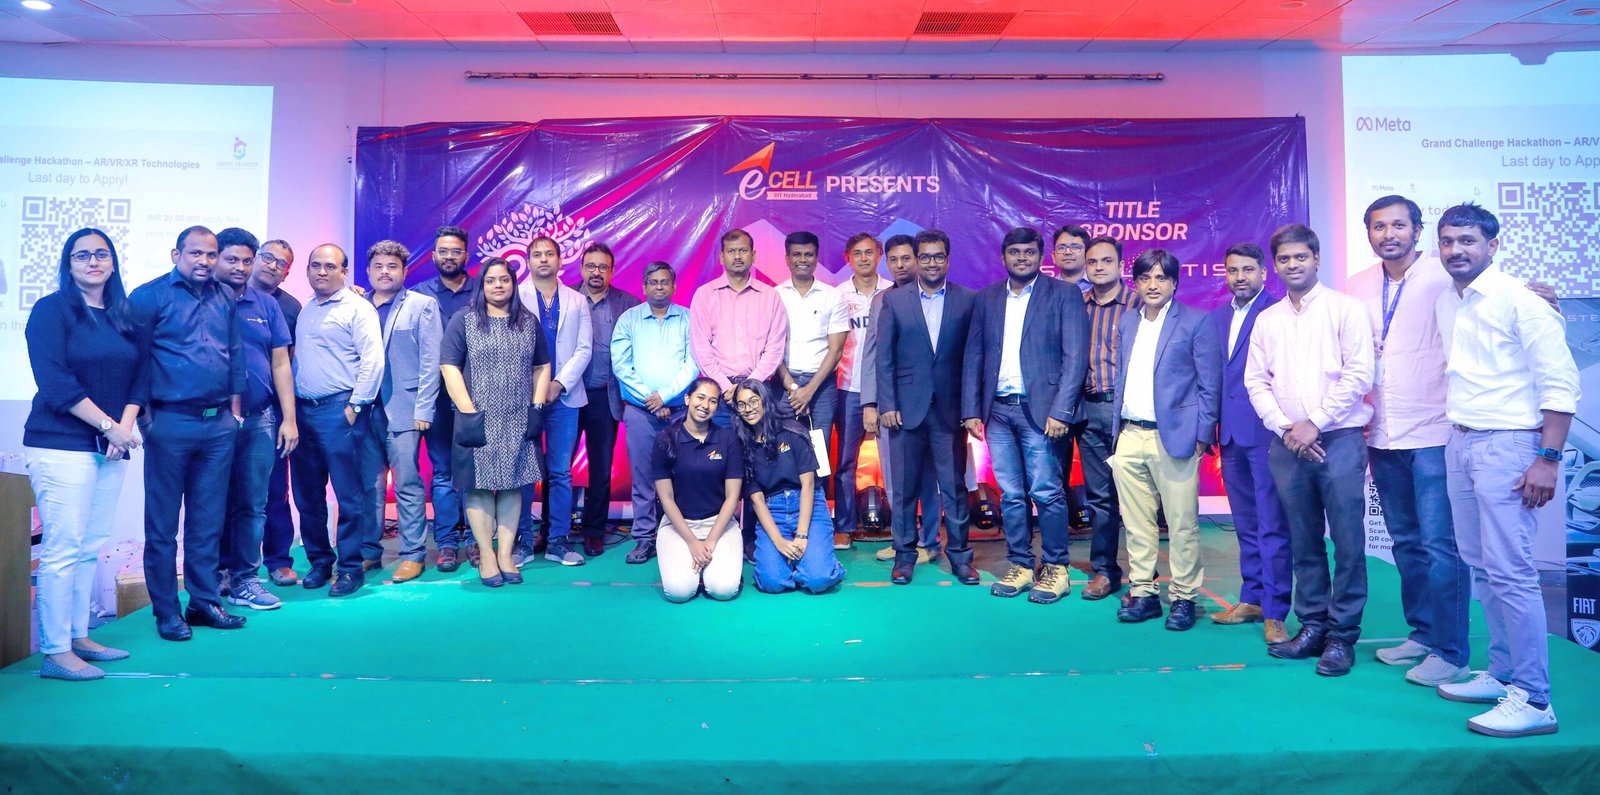 Hyderabad, October 29, 2022…IIIT Hyderabad’s    Entrepreneurship Cell conducted its annual flagship event, Megathon 2022, that witnessed over 700 participants from 30 colleges. The event was highly successful in garnering the most entrepreneurial and technology-driven youth from across the region. This staggering participation also makes Megathon '22 IIIT Hyderabad’s largest hackathon to date. It was a 24-hour hackathon involving 4 problem statements: 2 from their Title Sponsor Stellantis, 1 from Associate Sponsor Qualcomm, and the social problem from Raj Reddy Centre for Technology and Society (RCTS). After a gruelling round of pitches, team "AlphaQueue" emerged as winners for the first problem statement by Stellantis while team "Pied Piper" won the second one. Team "Le Boys" took home the Qualcomm prize and finally "Hack Your Mom" and "What the Hack" jointly won the social problem round. Since 2016, Megathon has been conducted annually and is growing every year. Last year it was conducted online, but this year it was offline, bringing in new challenges. These challenges were dealt with by the student team at E-cell, making Megathon the largest student-run Hackathon conducted at IIITH. The opening ceremony of the event was graced by talks from several distinguished speakers. Prof. Ramesh Loganathan kickstarted the event by introducing the students to CIE (Center for Innovation and Entrepreneurship), IIIT Hyderabad’s own start-up incubator. He was followed by Prof. CV Jawahar, Dean RnD, IIIT Hyderabad and CEO of CIE, and finally, Prof. Kannan Srinathan, who talked to students about the entrepreneurial spirit of problem solving. The event was filled with enthusiastic participants who kept the energy high throughout the event. After one round of selection by the pre-jury, 23 teams presented their lightning pitches to the final jury in the closing ceremony. The final jury comprised Alok Madhukar - Managing Director of Goldman Sachs, Anish Anthony - Angel Investor and CDO of T-Hub, Murali Talasila - Innovator and ex-PWC Risk Management partner, Saurabh Kumar - CEO of GMR Cargo, Madhusudanan Kandasamy - Qualcomm and Rahul Rajupalepu - Vice President and Head of India Digital Hub of Stellantis. They not only judged the lightening pitches presented by the finalists but also gave the participants valuable inputs and insight. The shortlisted Stellantis problem statement winners all get to be a part of a much larger hackathon and participate to get their best ideas reviewed. The event closed with the prize distribution ceremony, followed by a photo session with all the winners and with the people who made the enthralling event a reality.